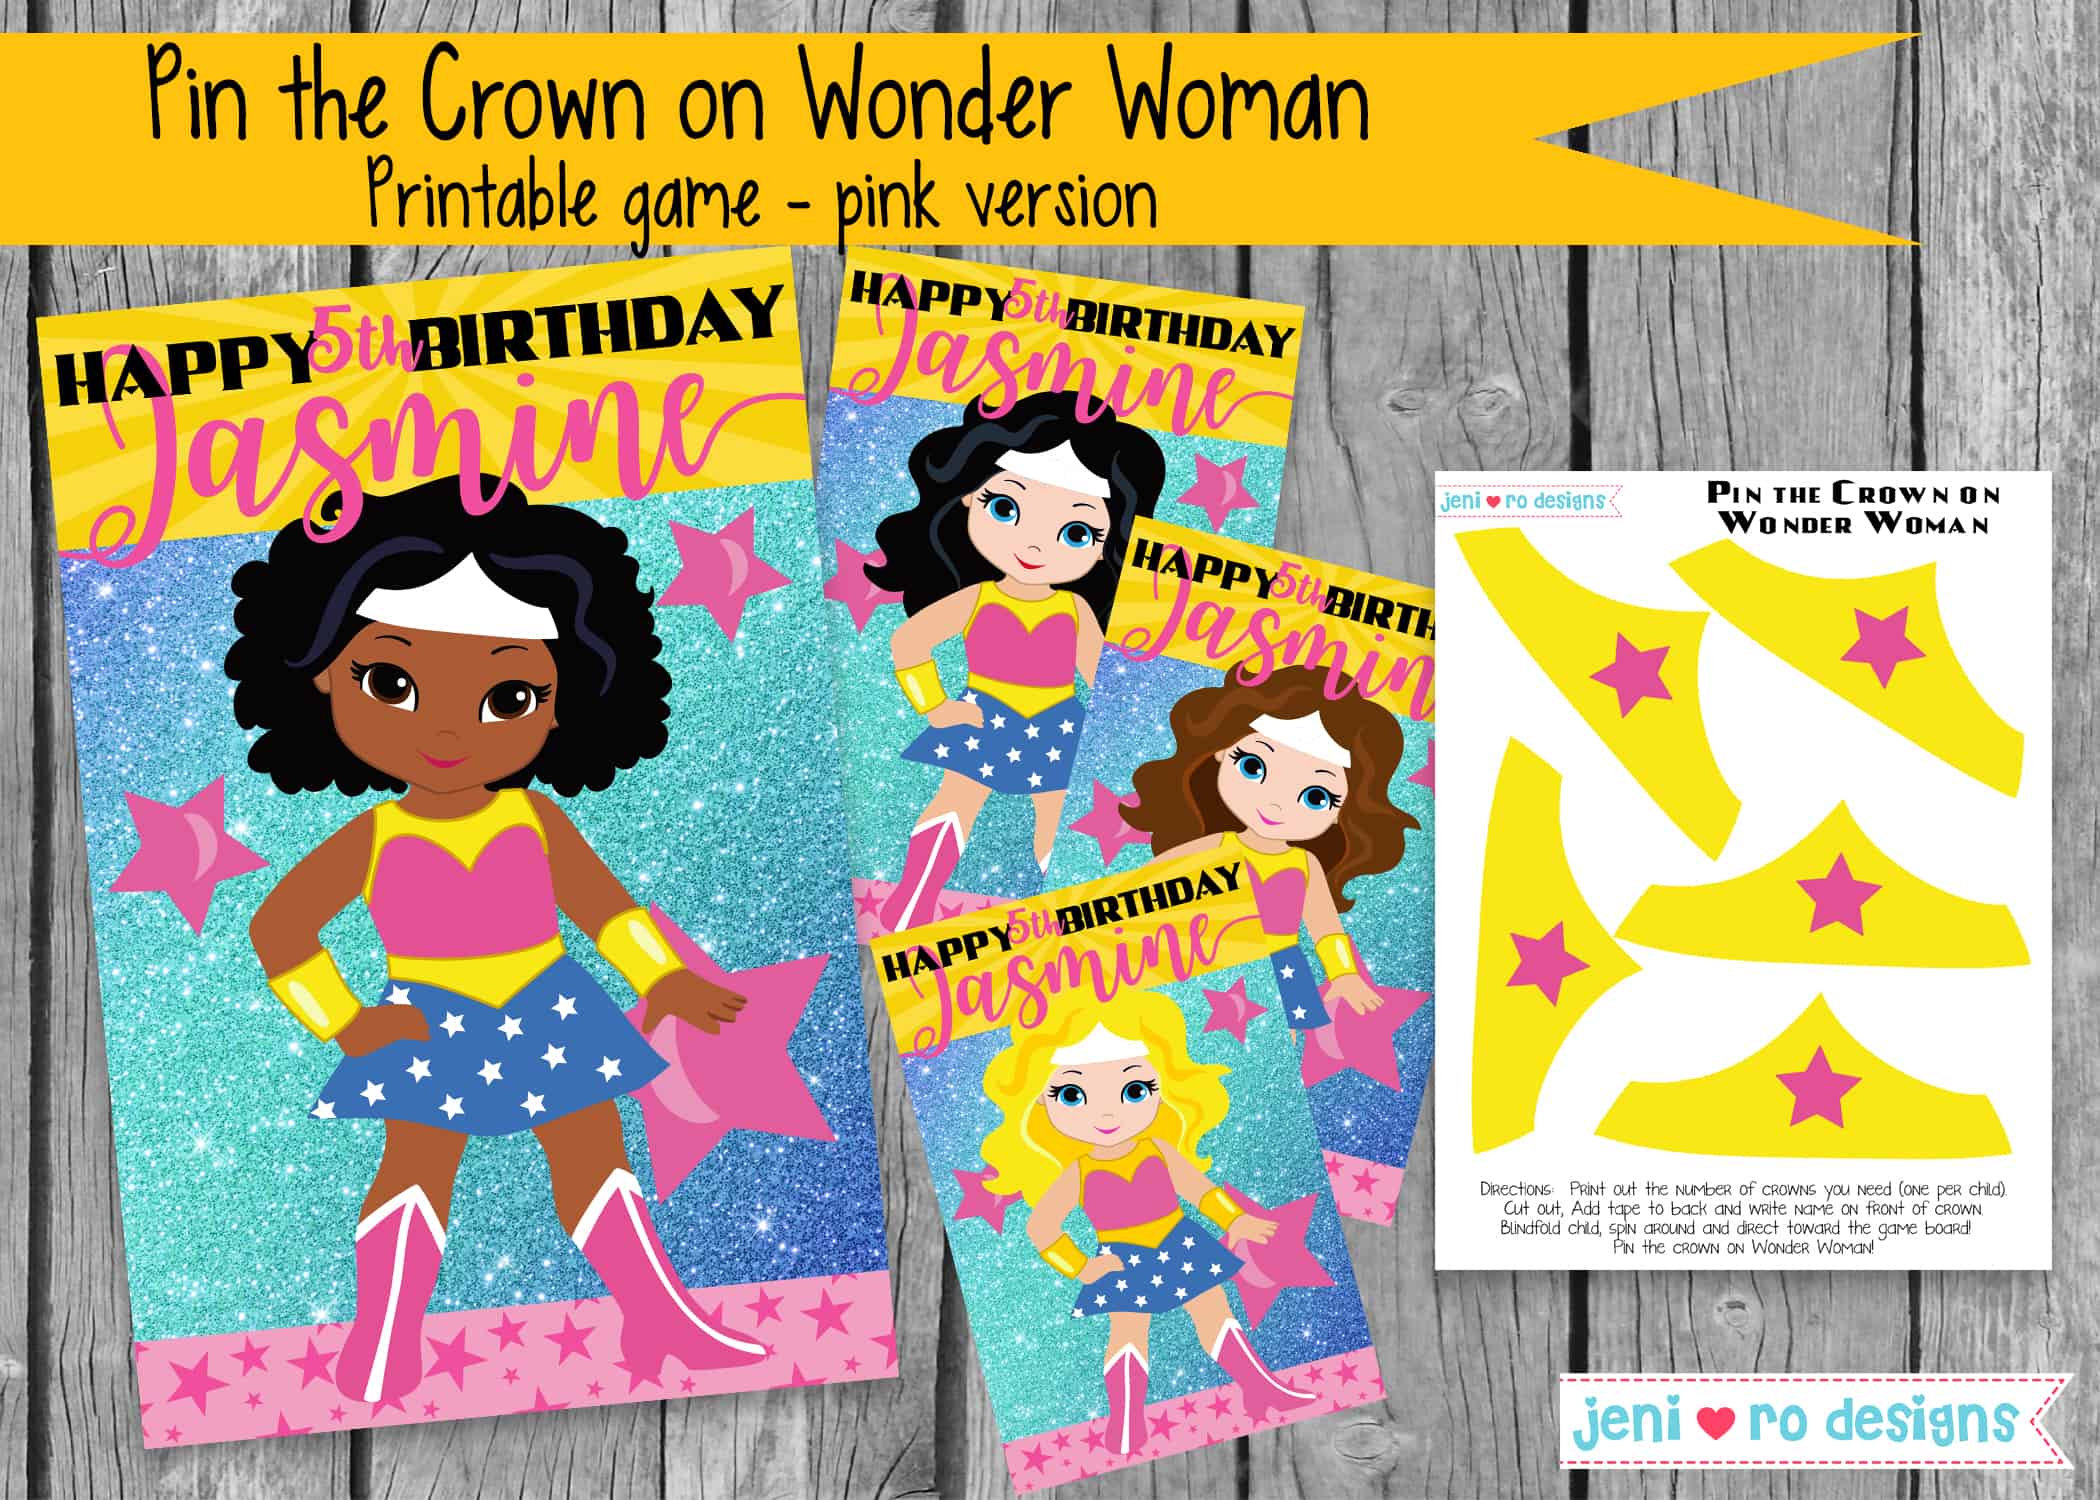 A game card of wonder woman with decorated borders and icons, in